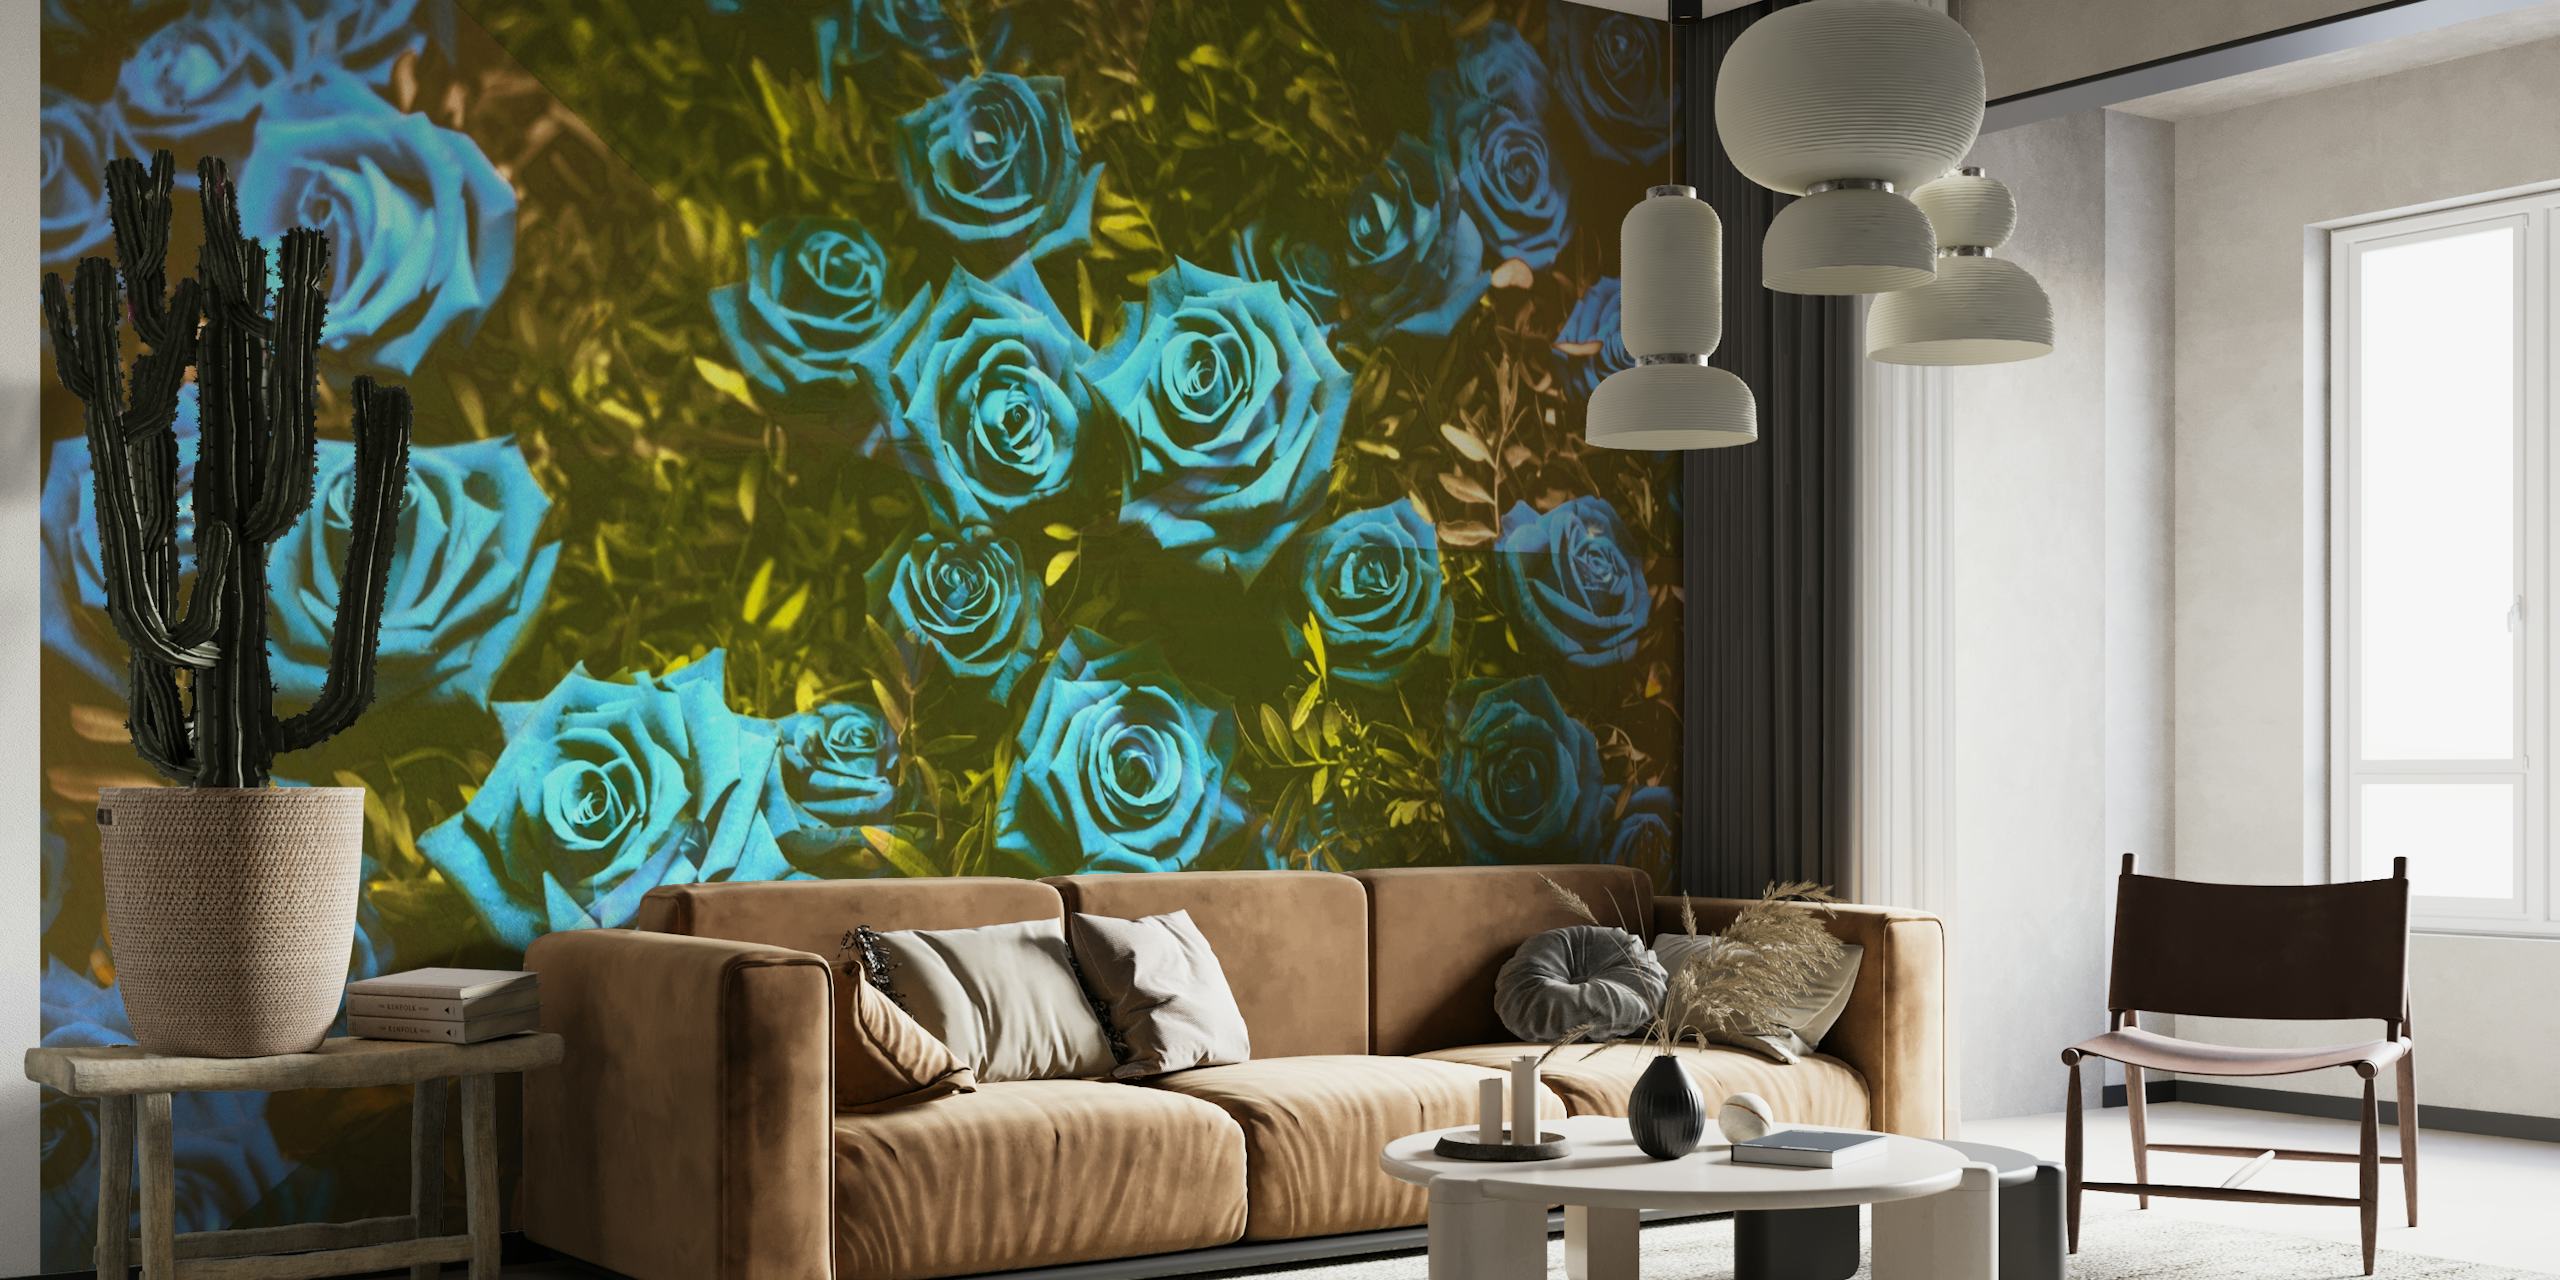 Enchanting blue roses wall mural on a dark backdrop, creating a tranquil garden atmosphere